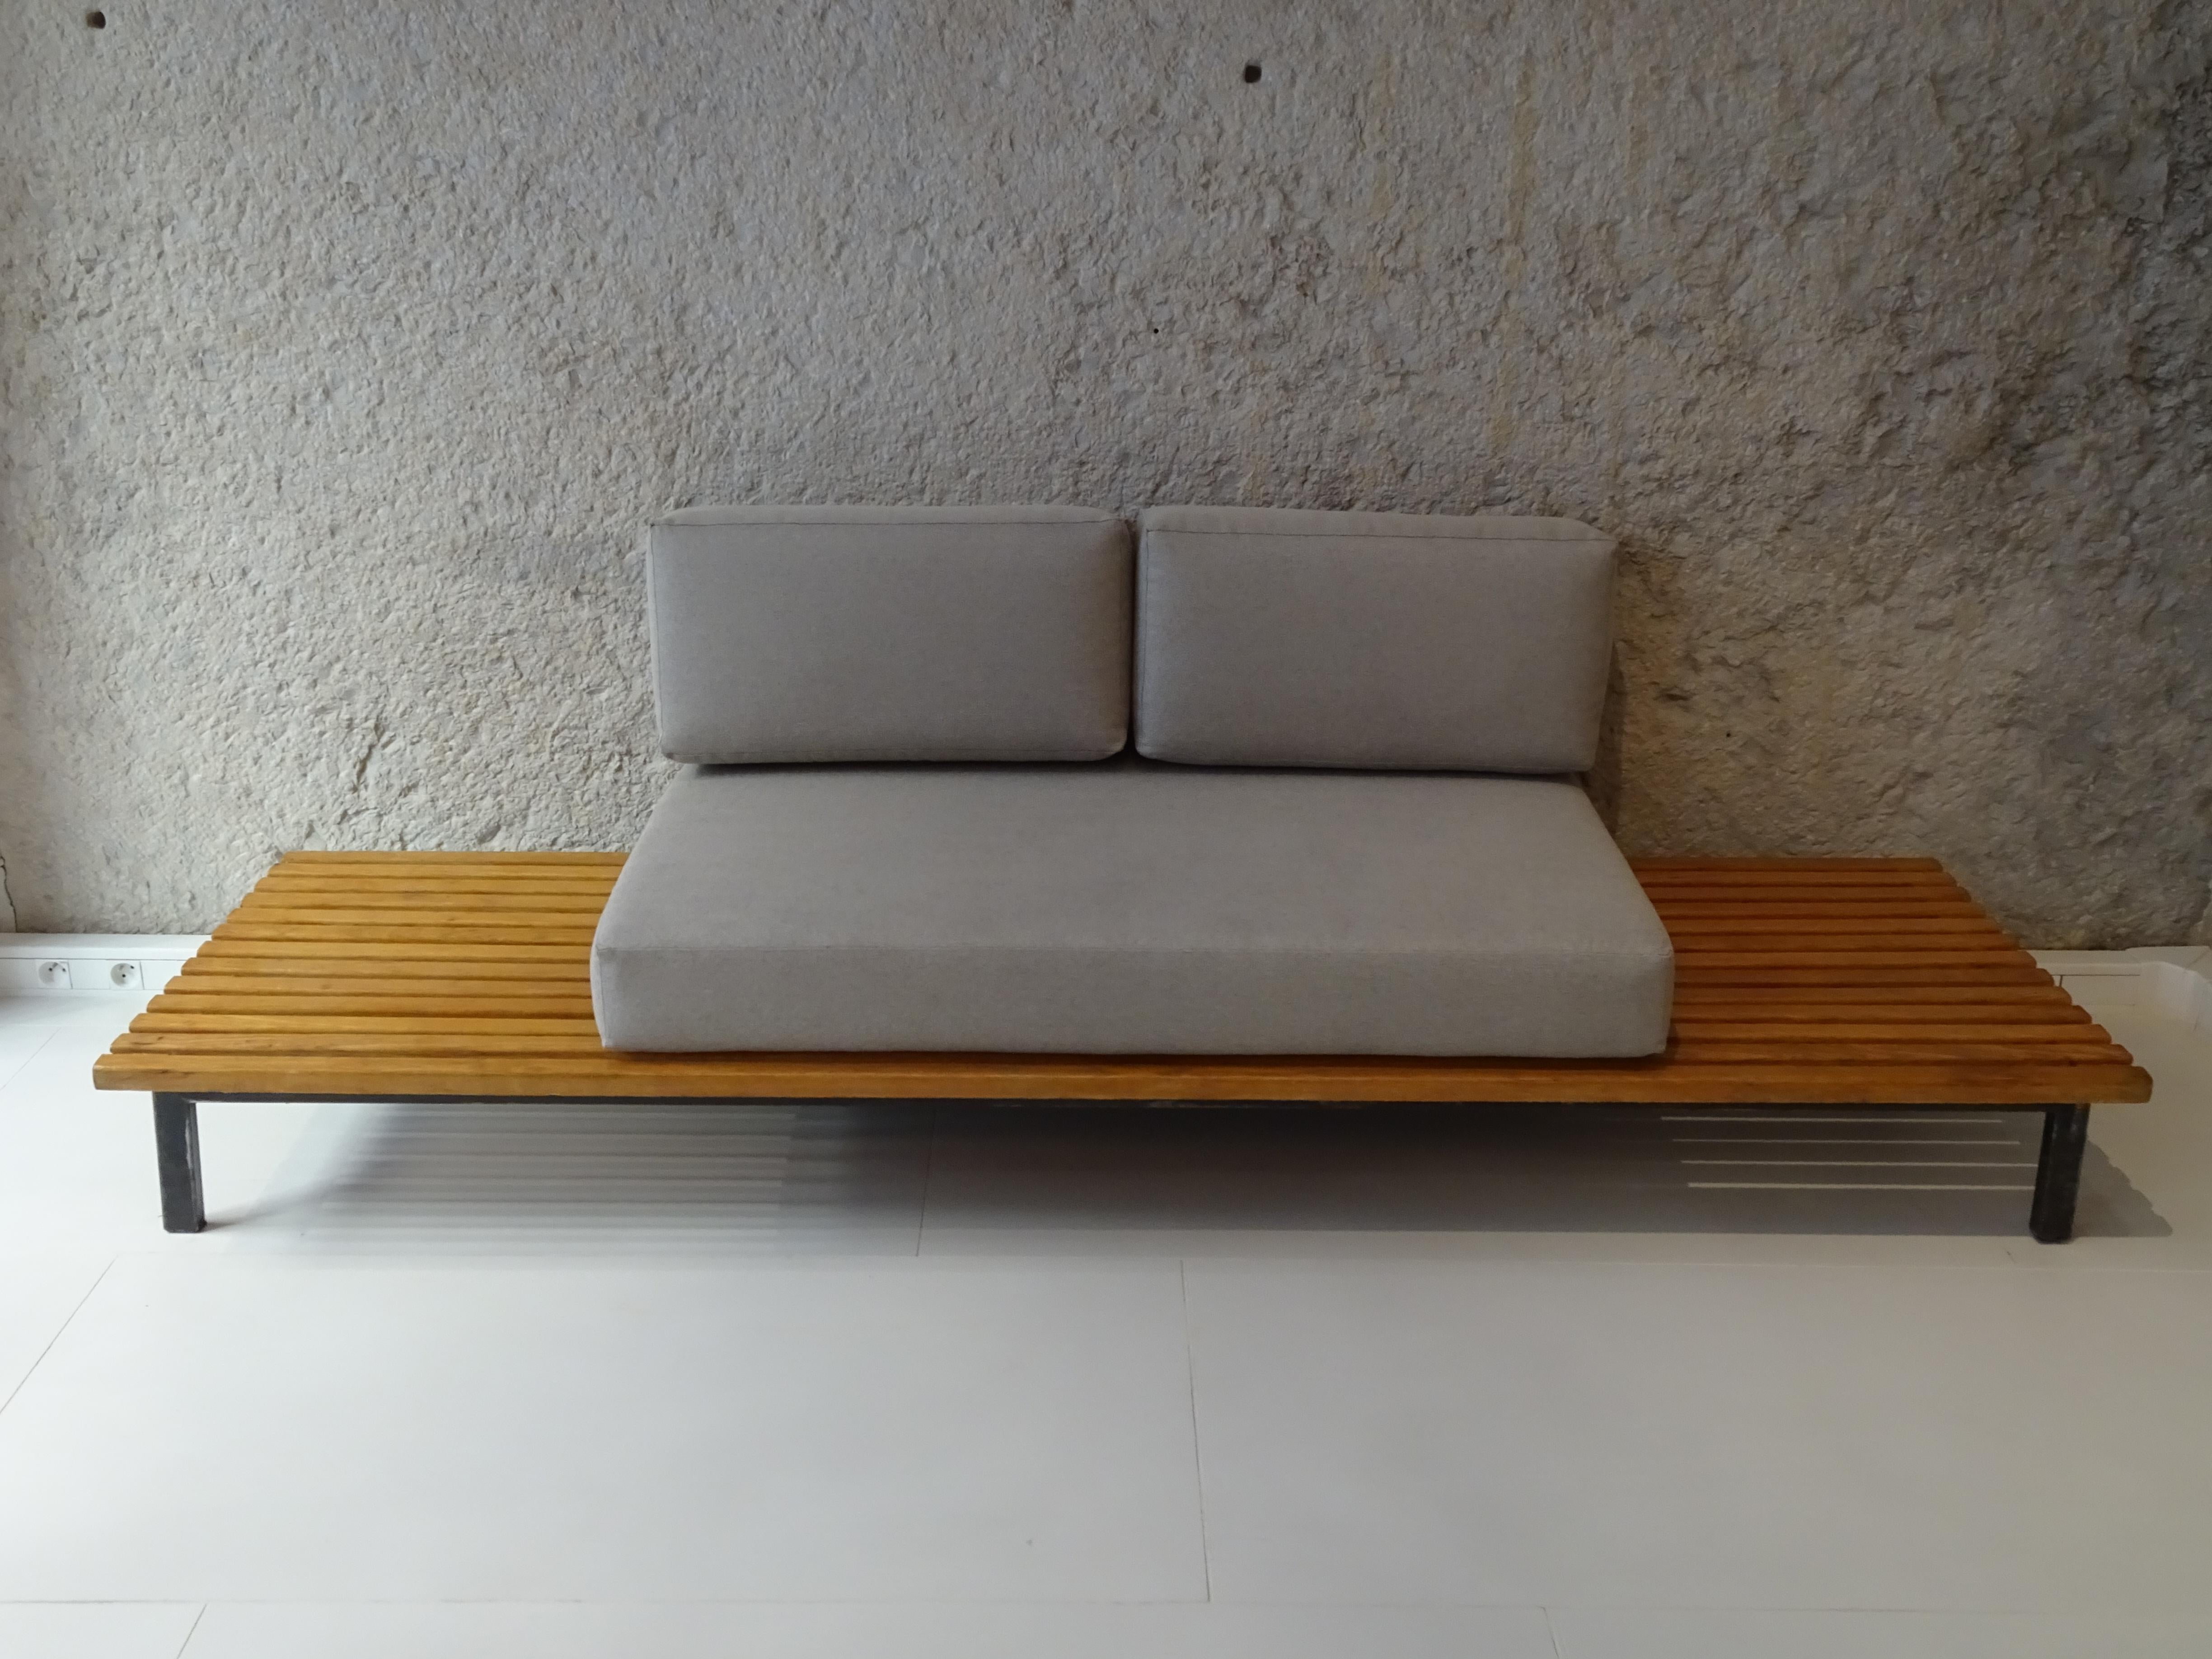 Cansado bench, Charlotte Perriand.
Year 1954. Edition Steph Simon.
Very good general condition.

Provenance: Cansado mining town, Mauritania, Africa.
Dimensions: 227 x 70 cm; Seat height 38: cm; Backrest height: 48 cm.